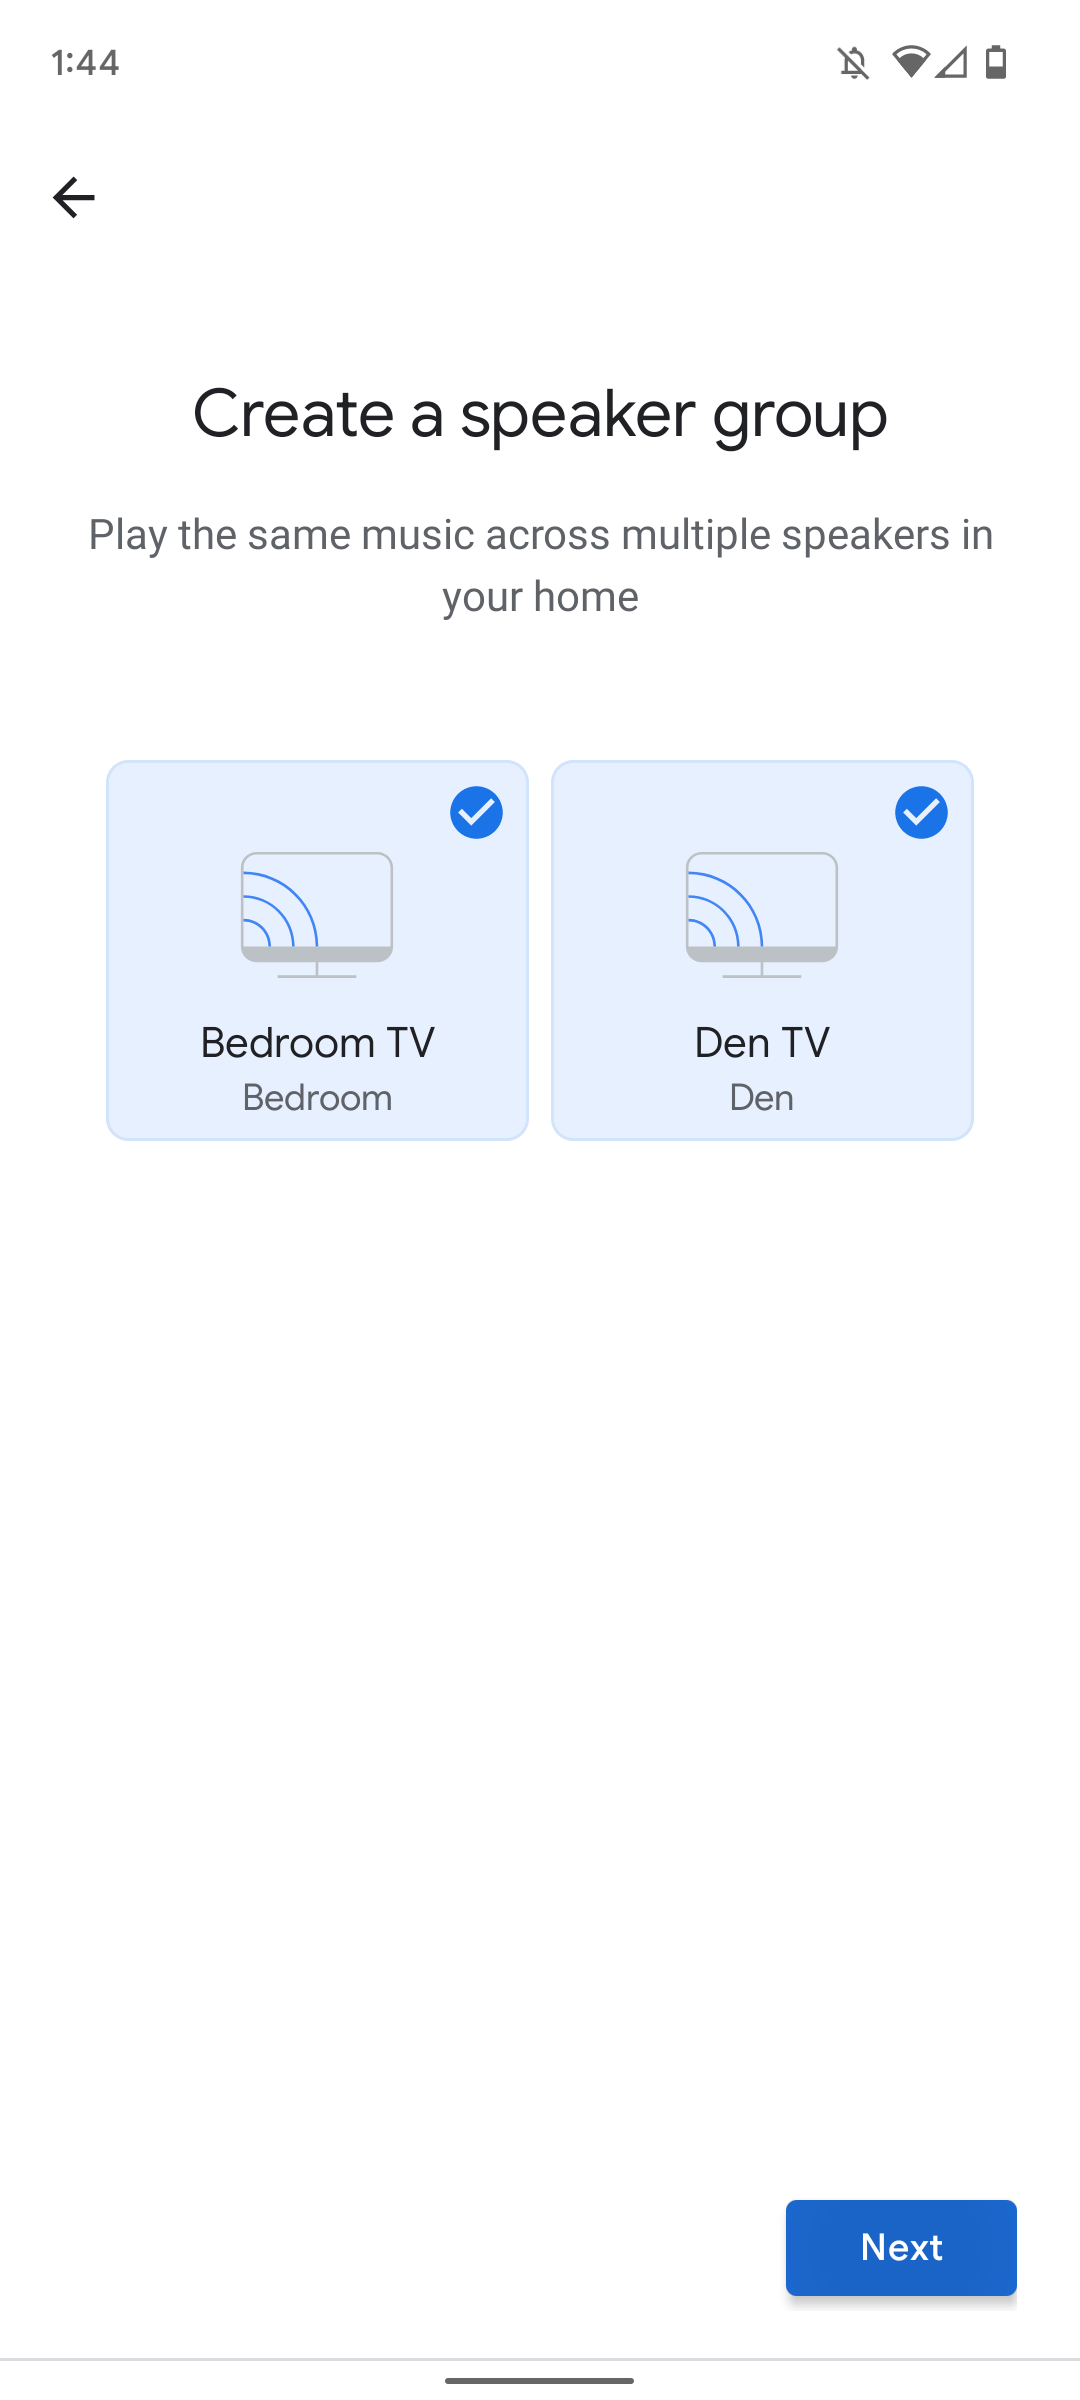 google home app screenshot showing two devices